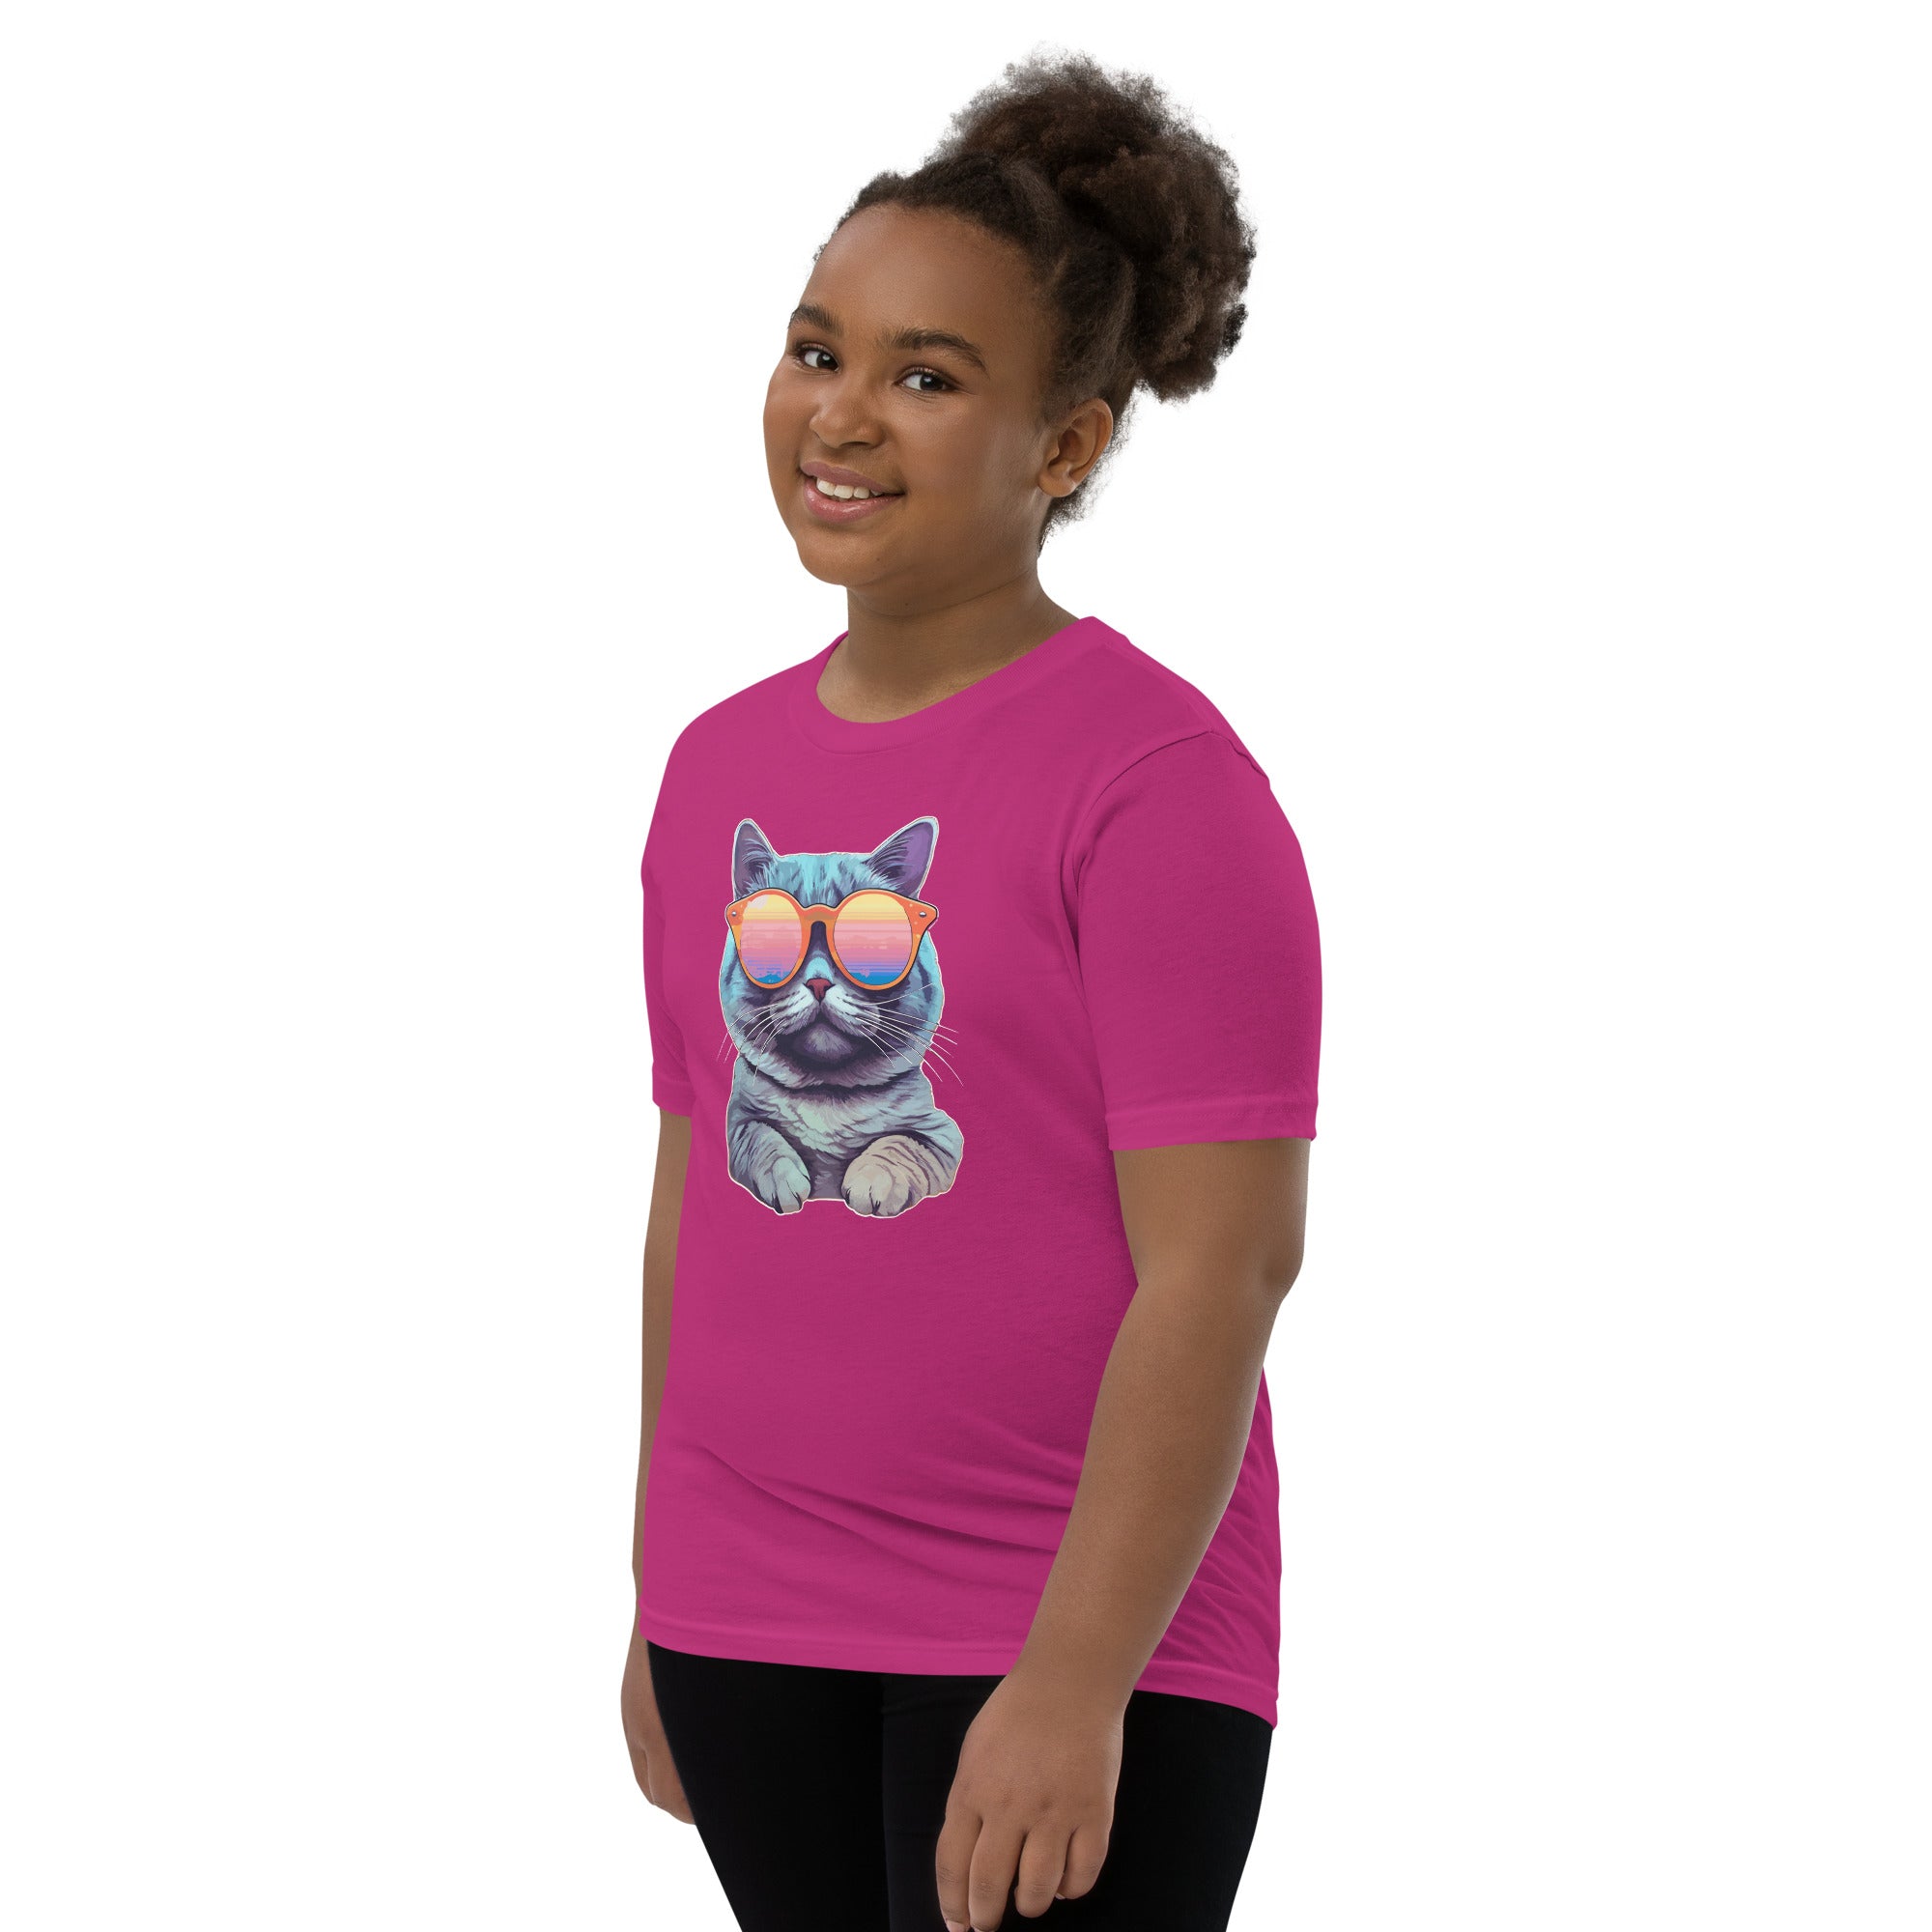 Cool Cat - Youth Short Sleeve T-Shirt